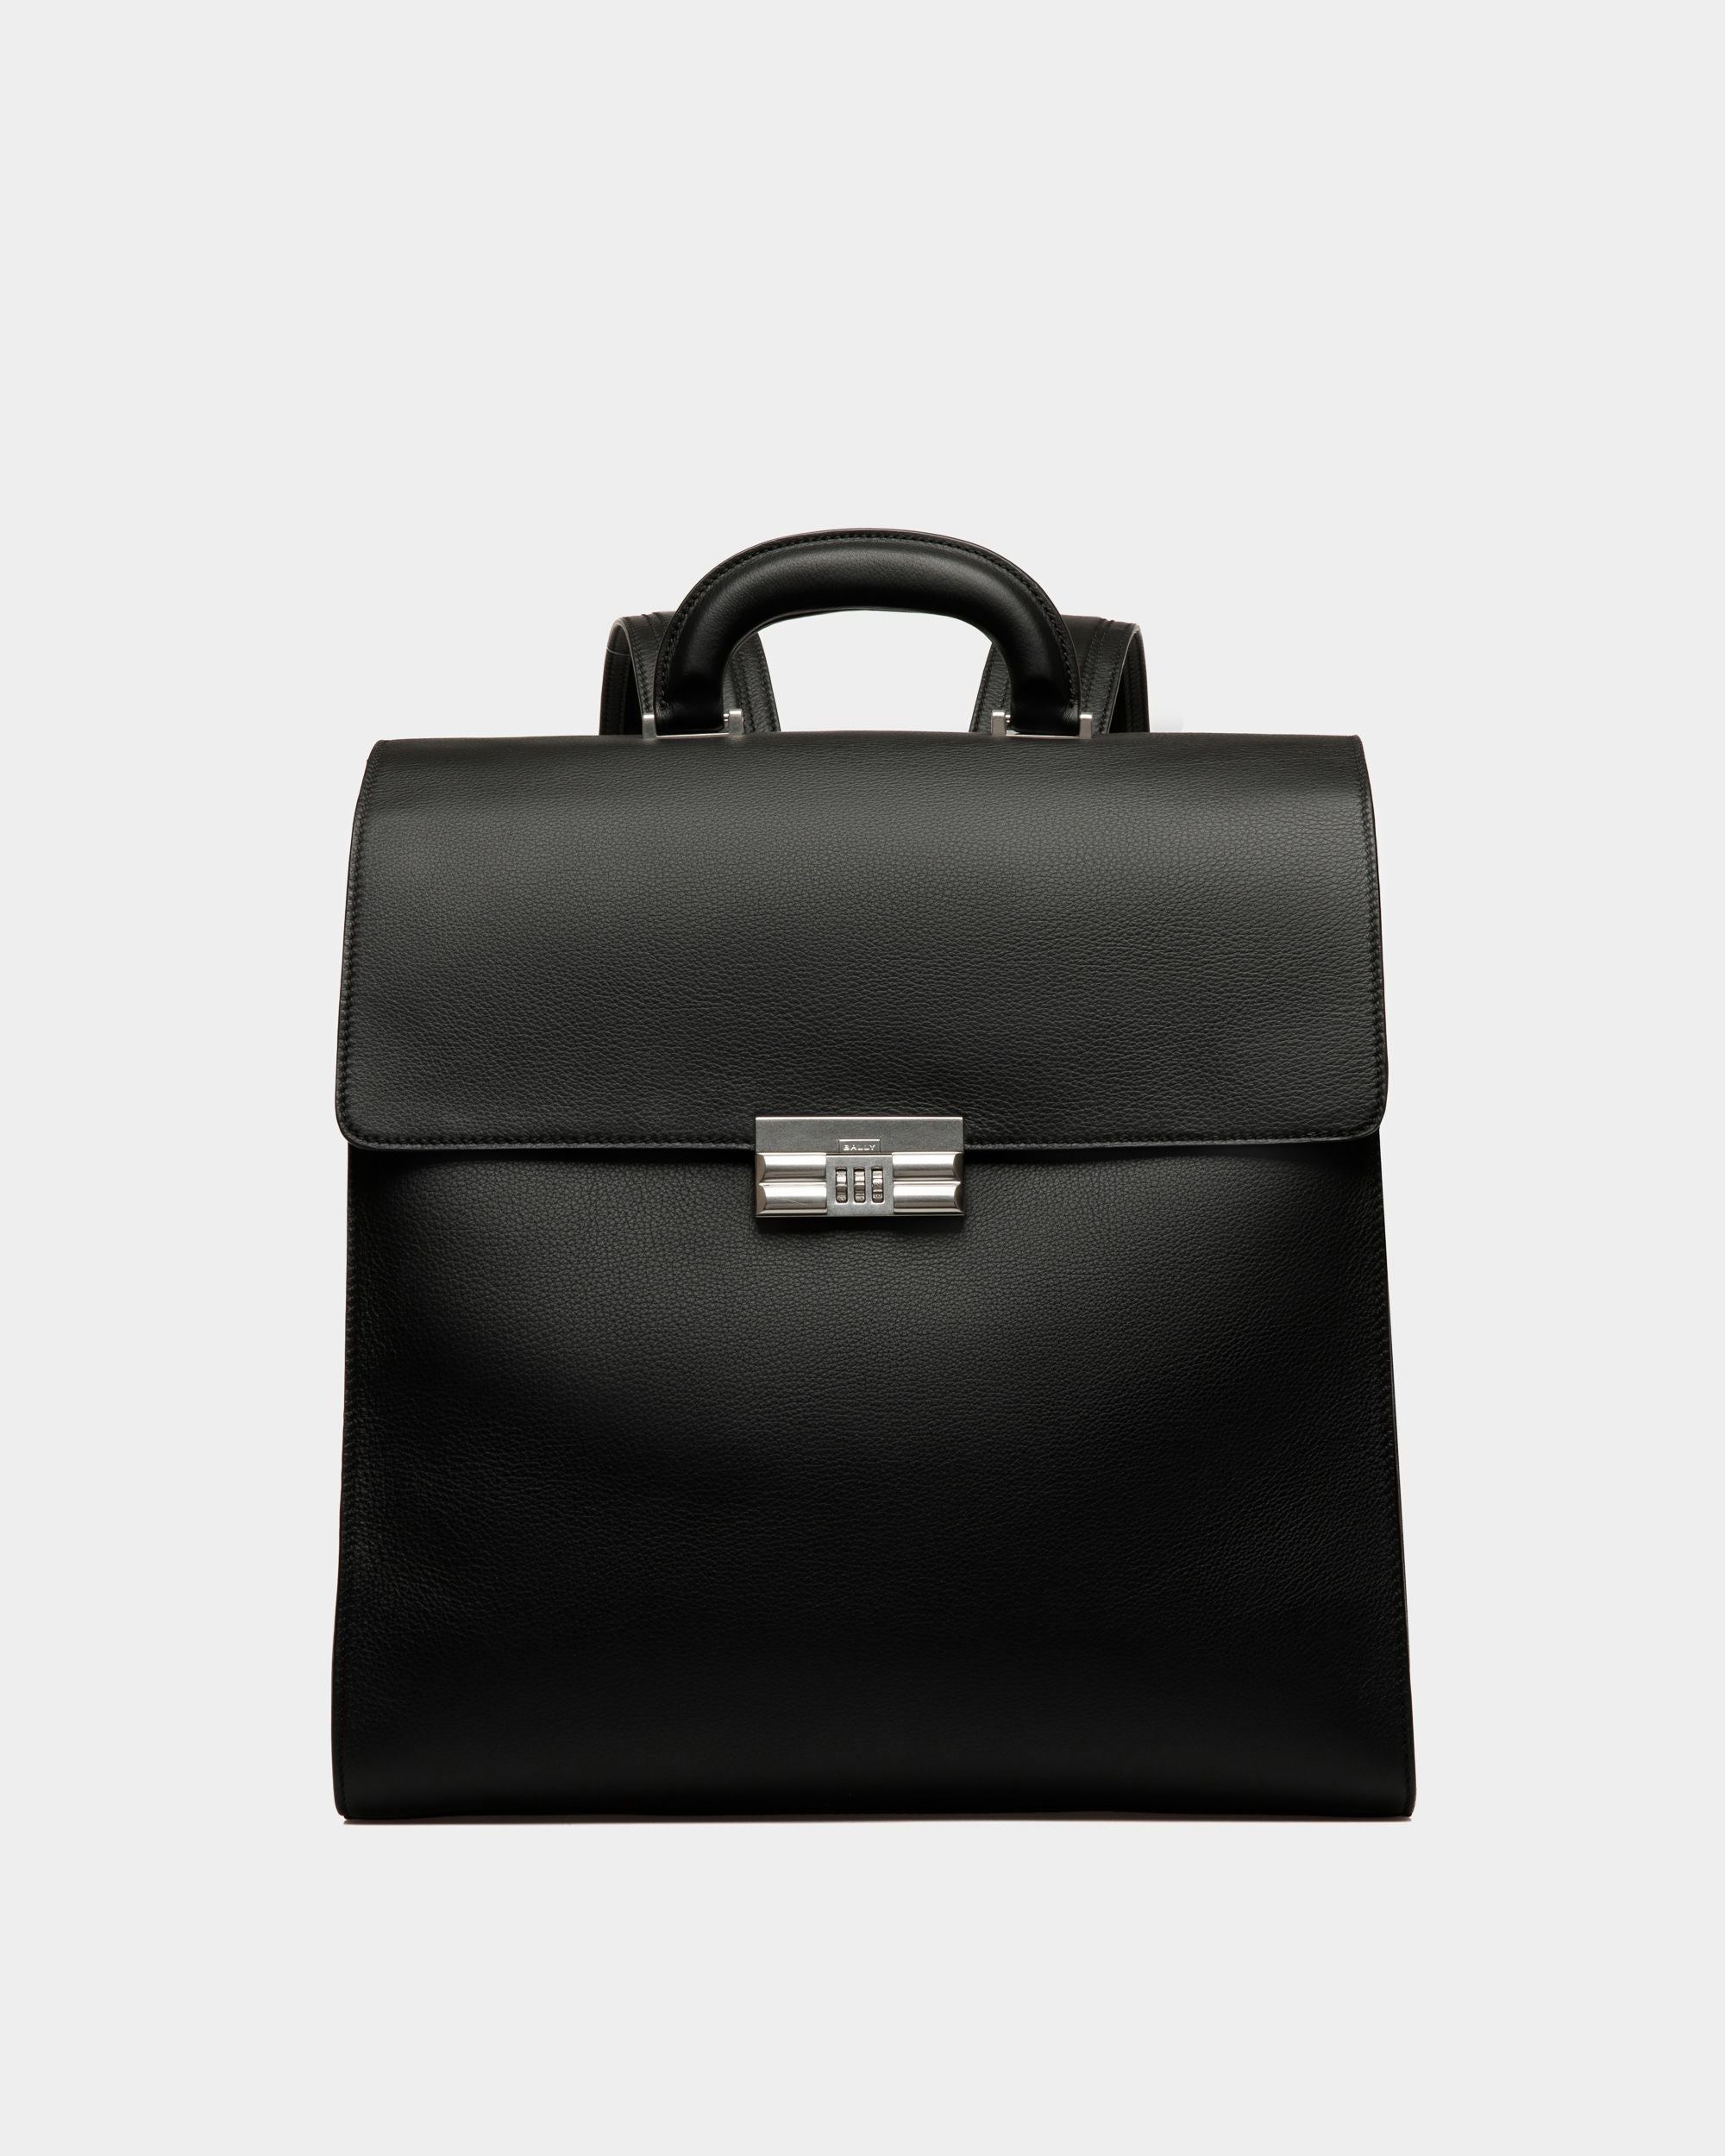 Busy Bally | Men's Backpack in Black Leather | Bally | Still Life Front